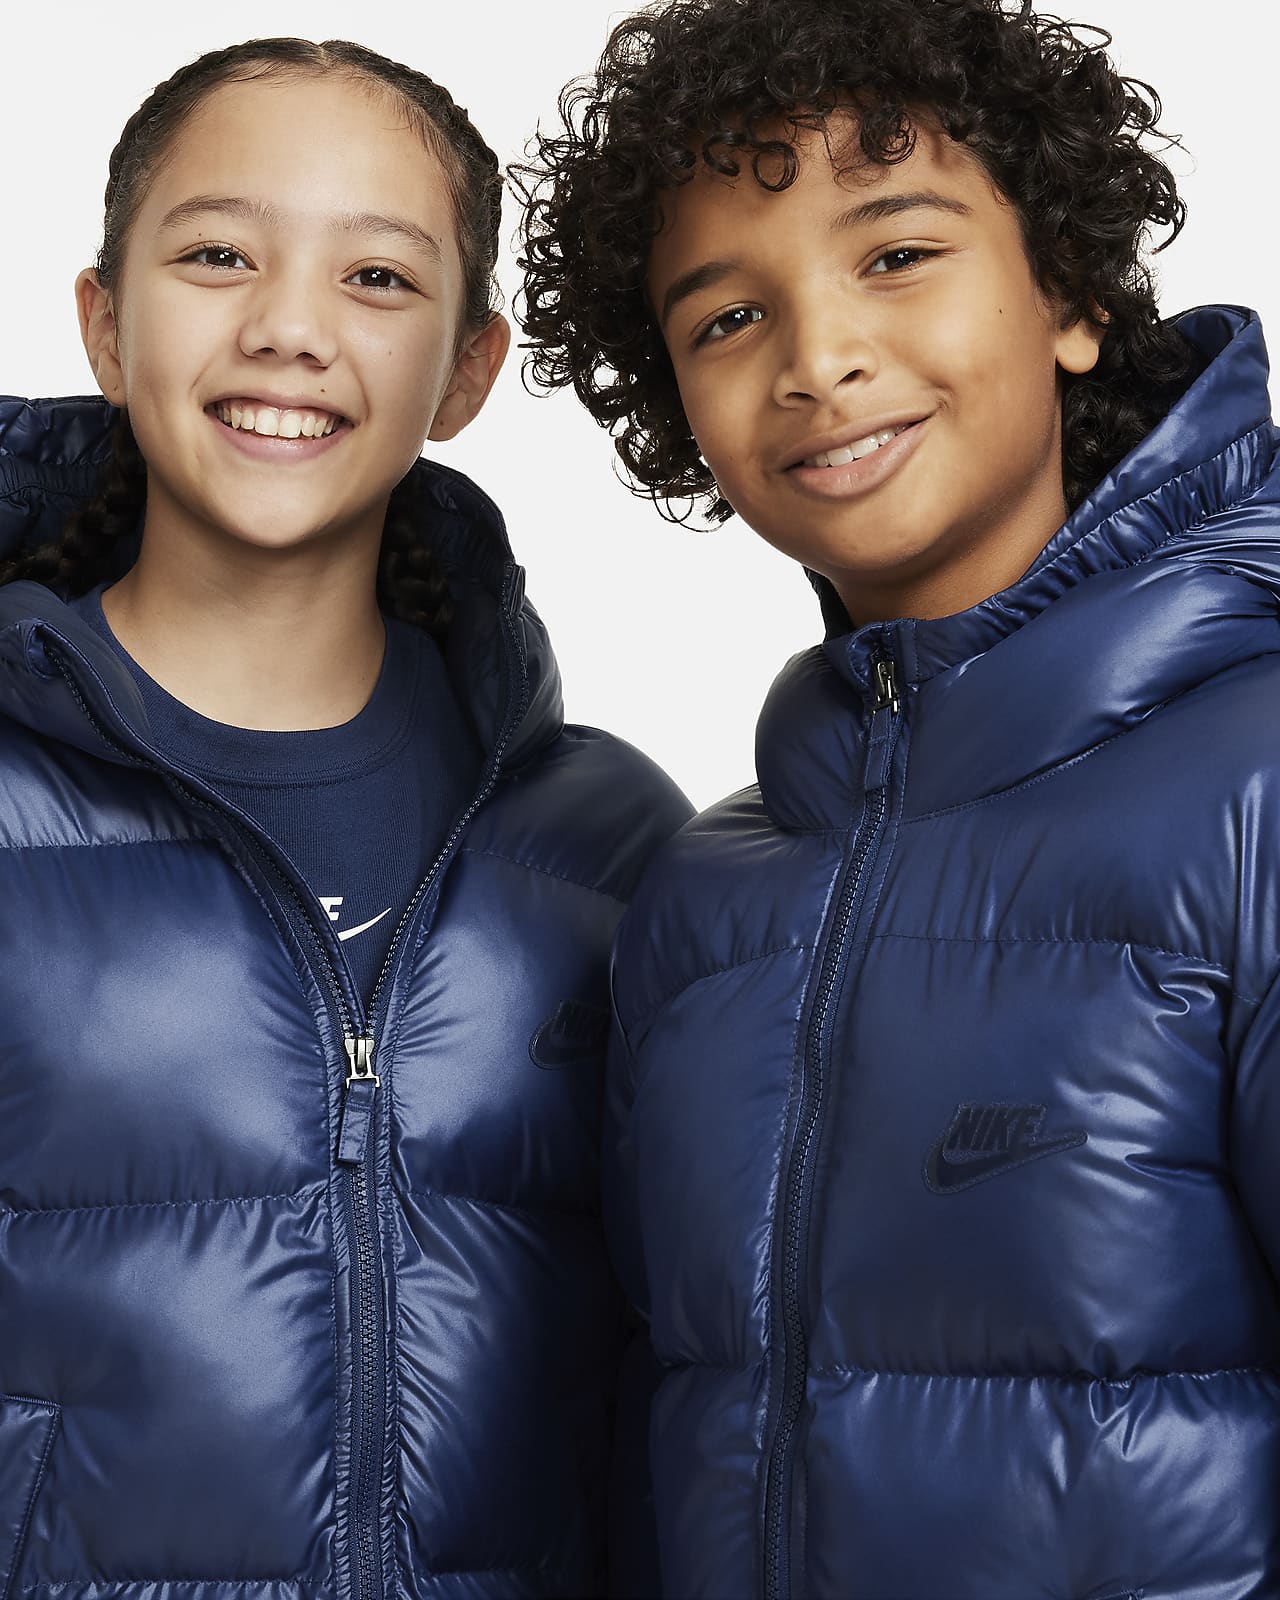 Nike Sportswear Heavyweight Synthetic Fill EasyOn Big Kids' Therma-FIT  Repel Loose Hooded Vest.